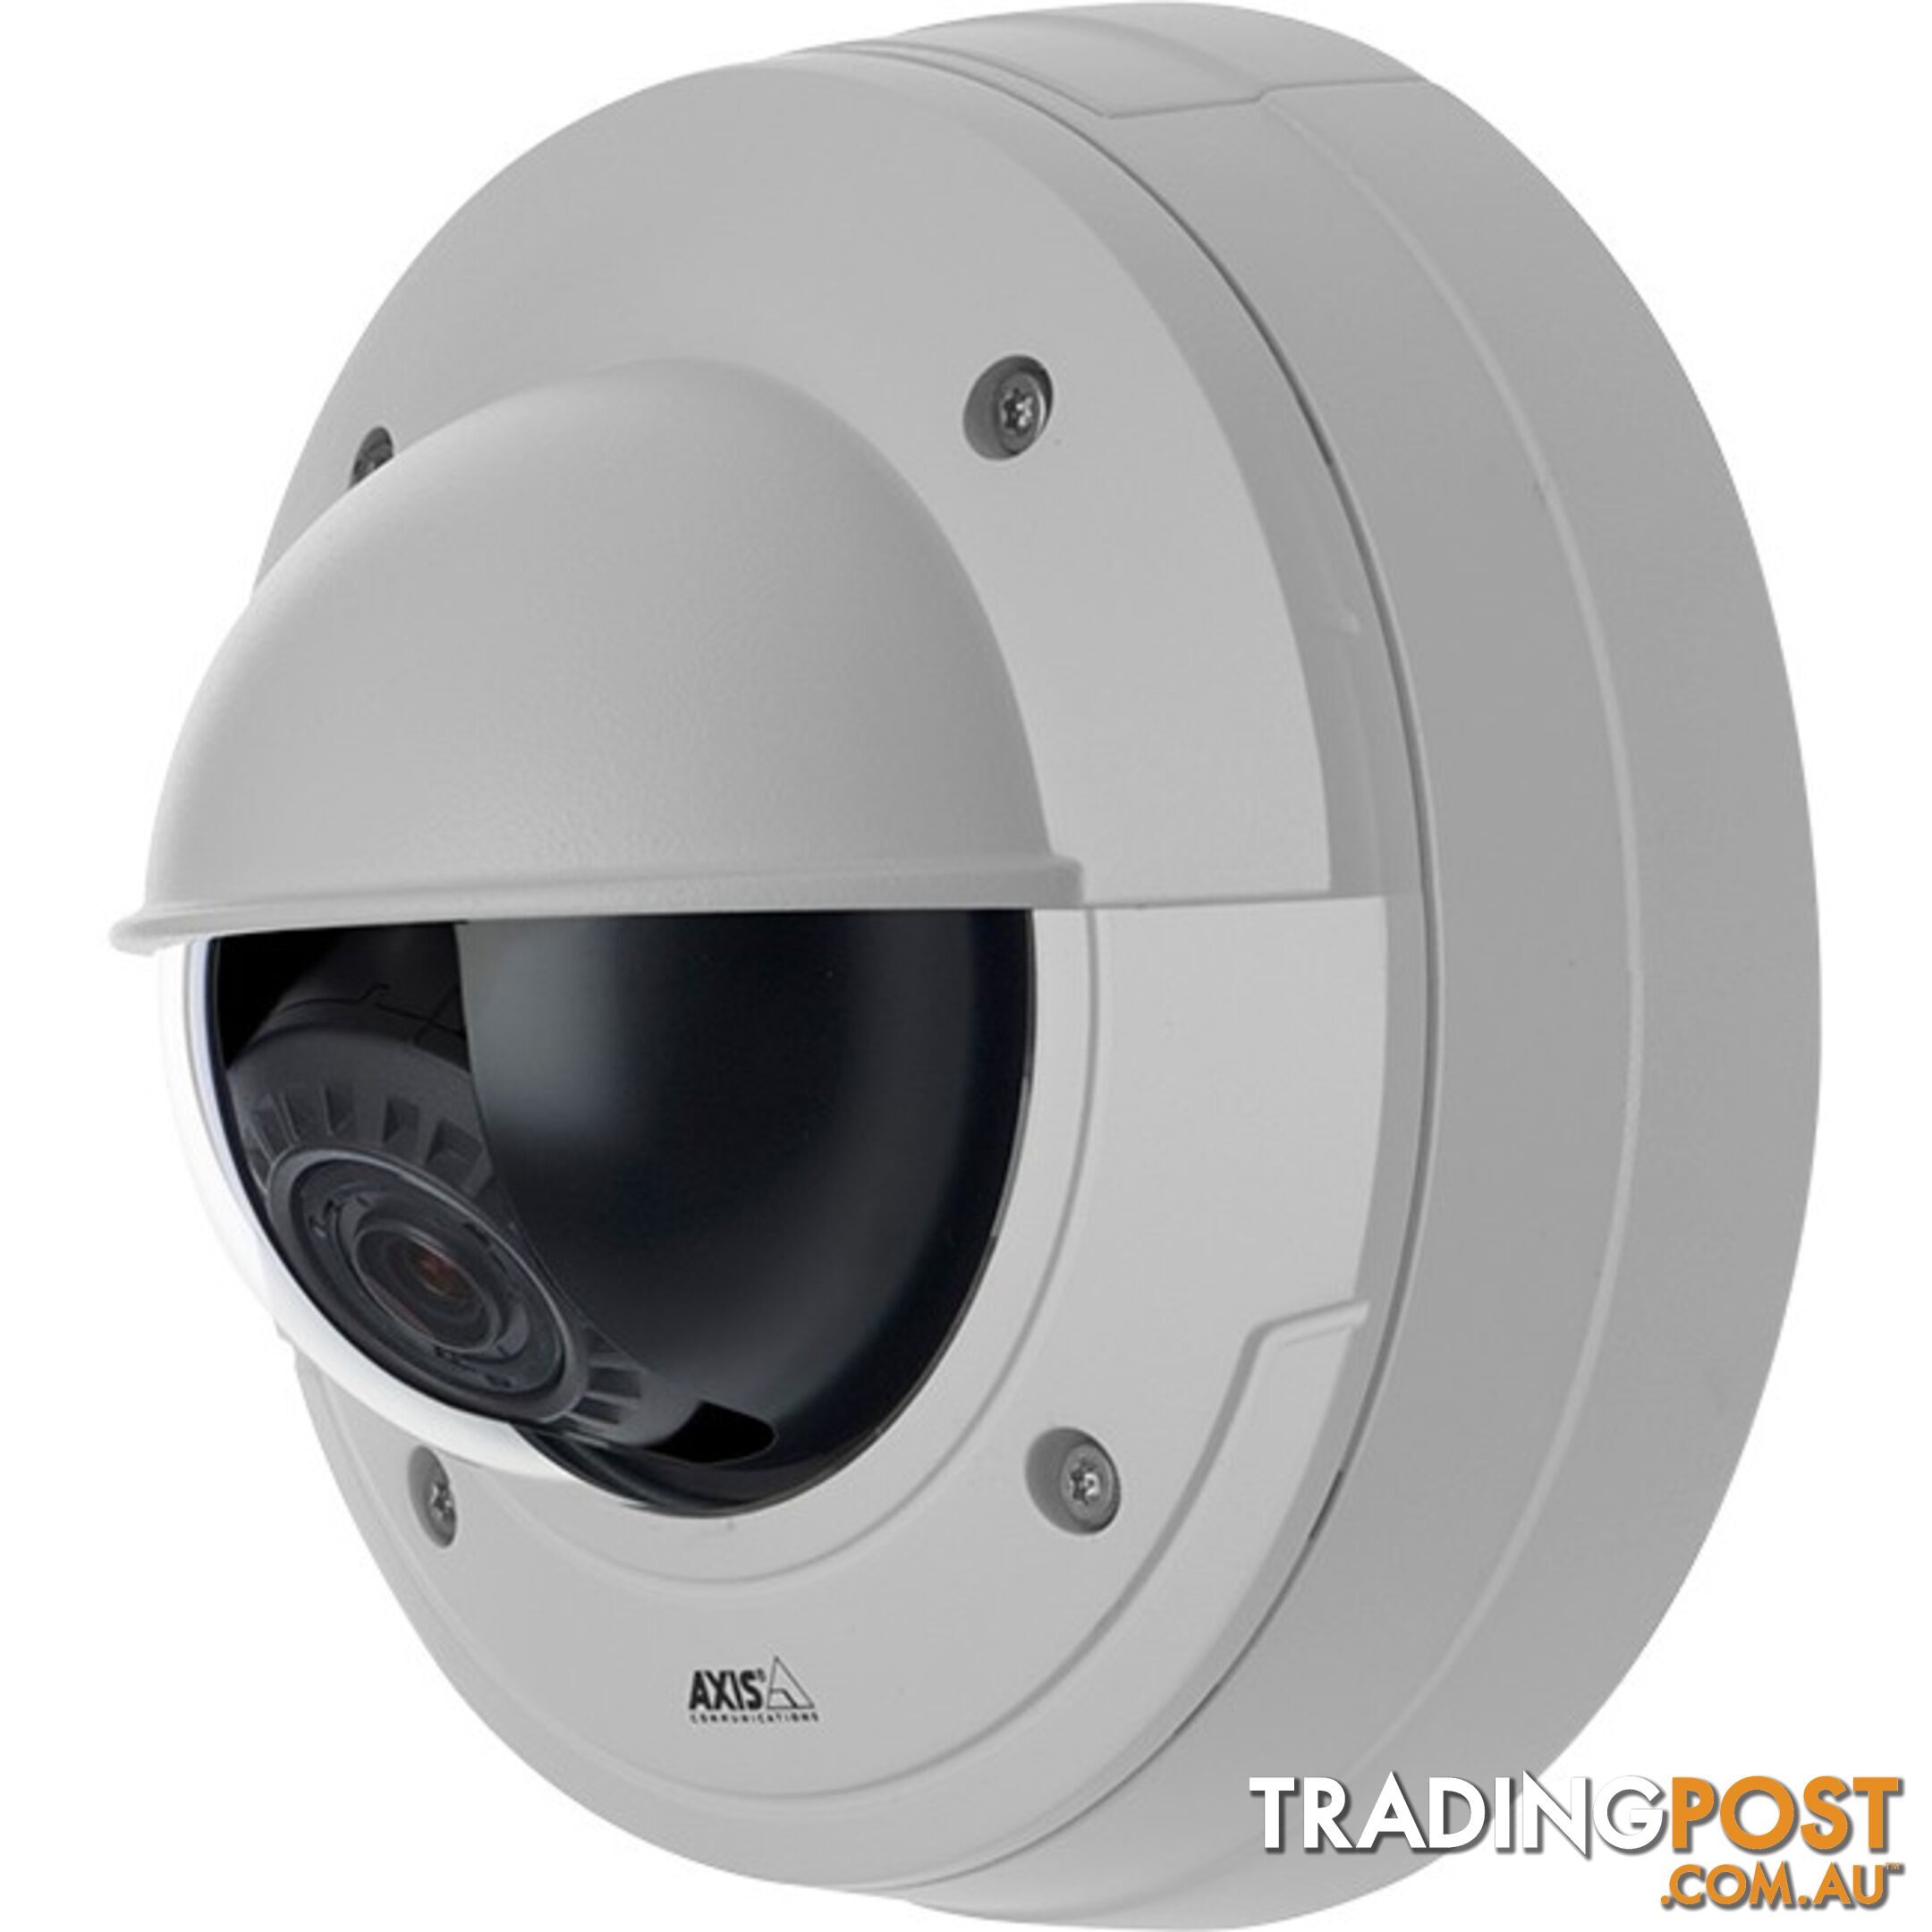 AXP3364VE6MM HD DAY/NIGHT OUTDOOR IP CAMERA VANDAL RESISTANT DOME 1MP